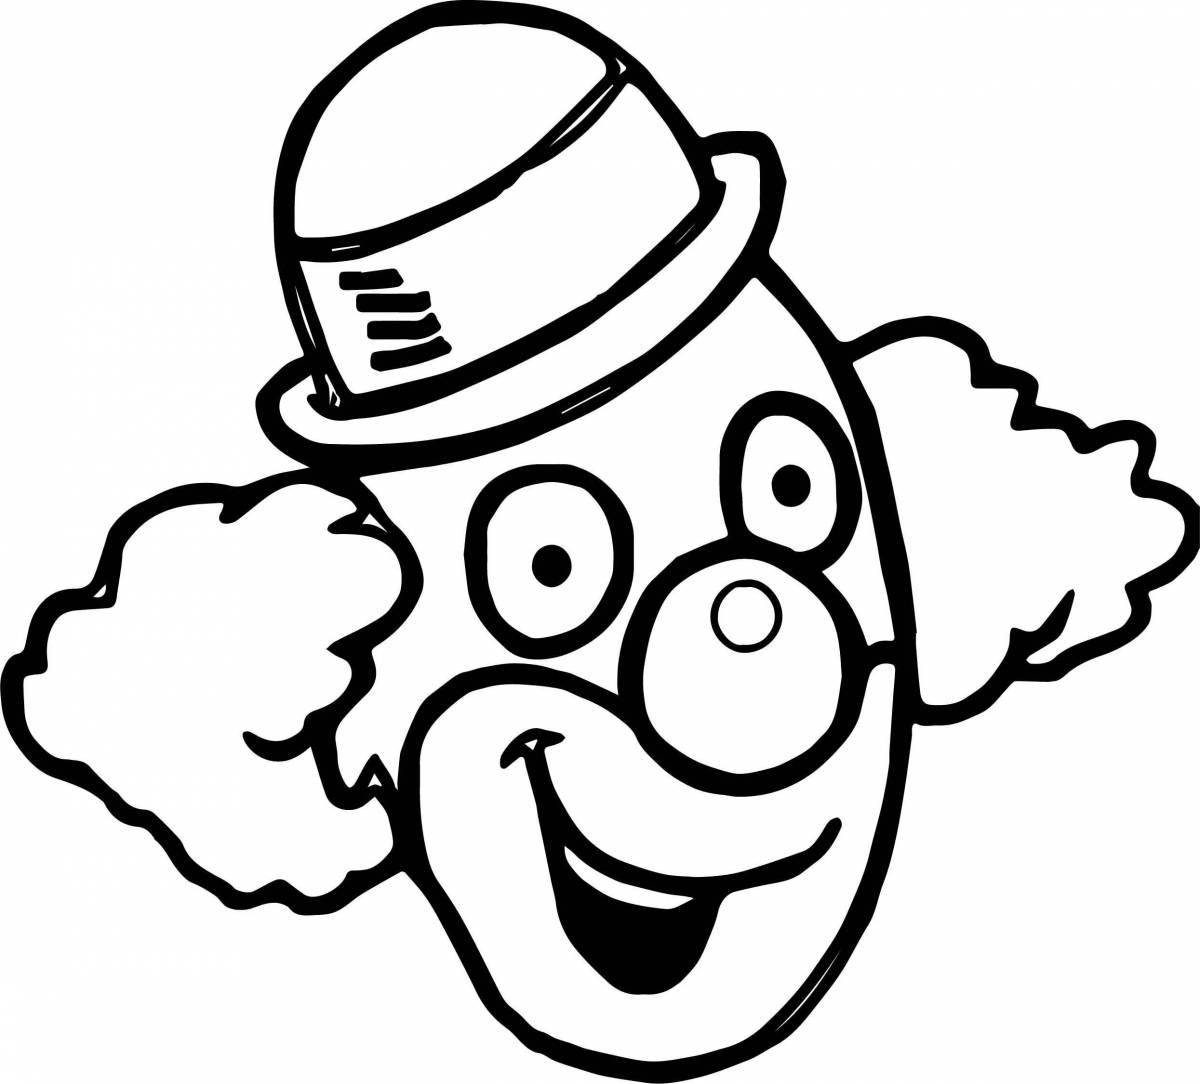 Adorable clown face coloring page for kids